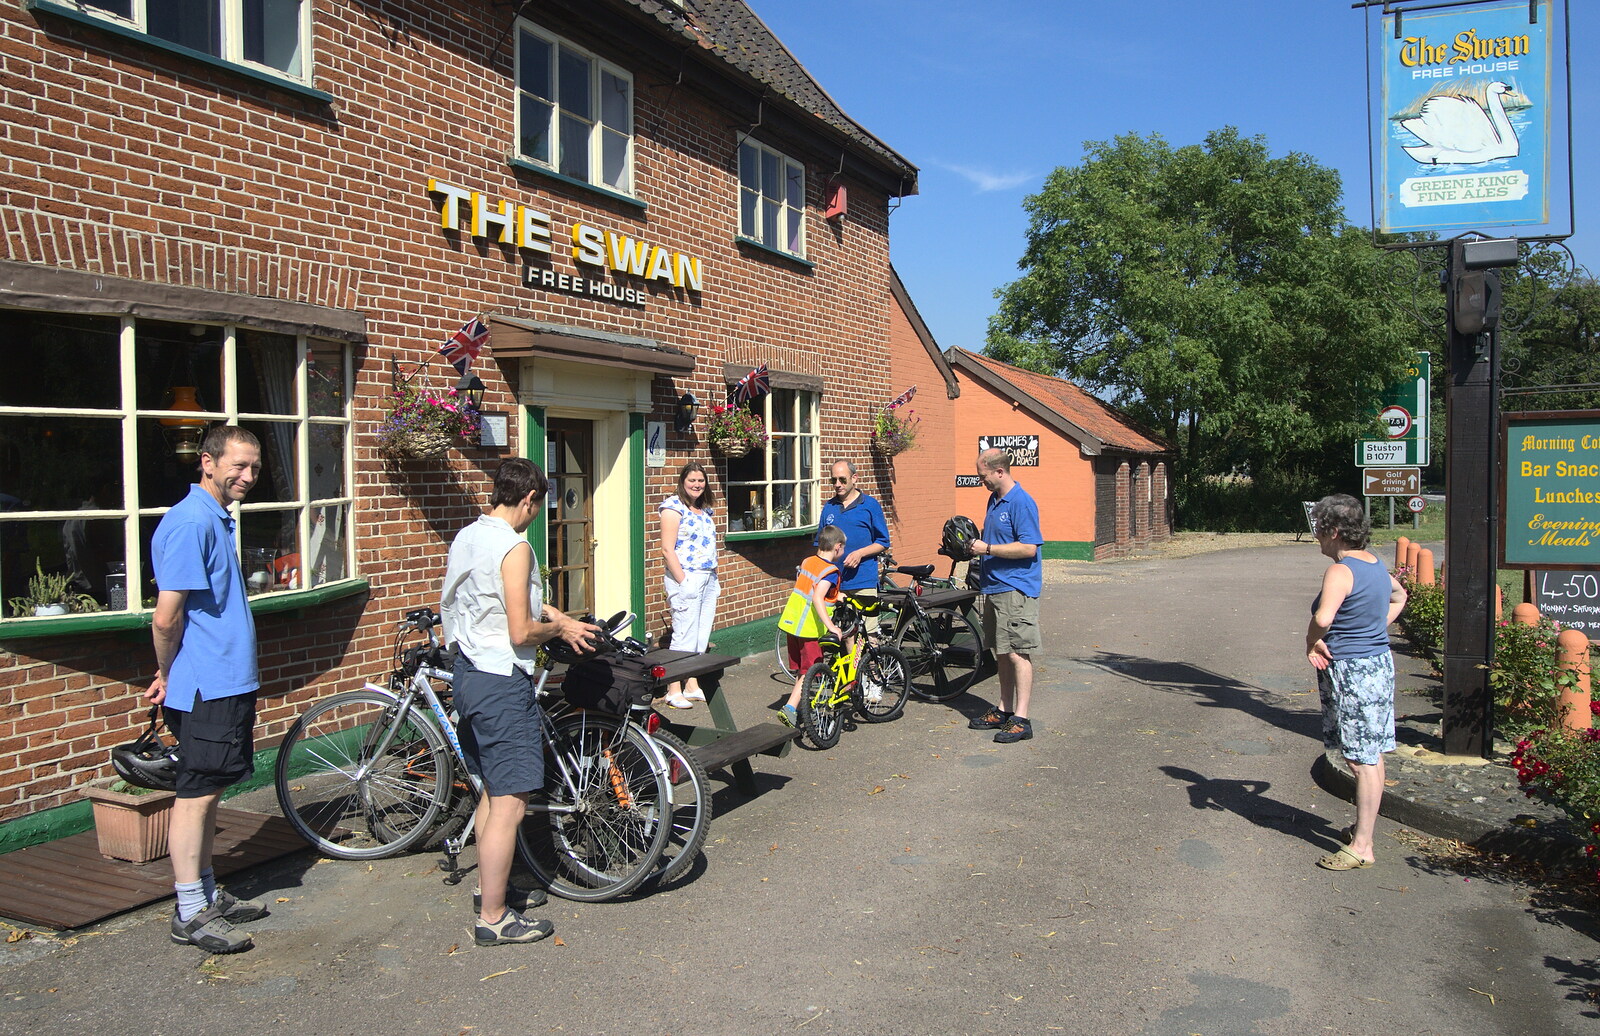 The cyclists return to The Swan from The BSCC does Matthew's Church Bike Ride, Suffolk - 8th September 2012